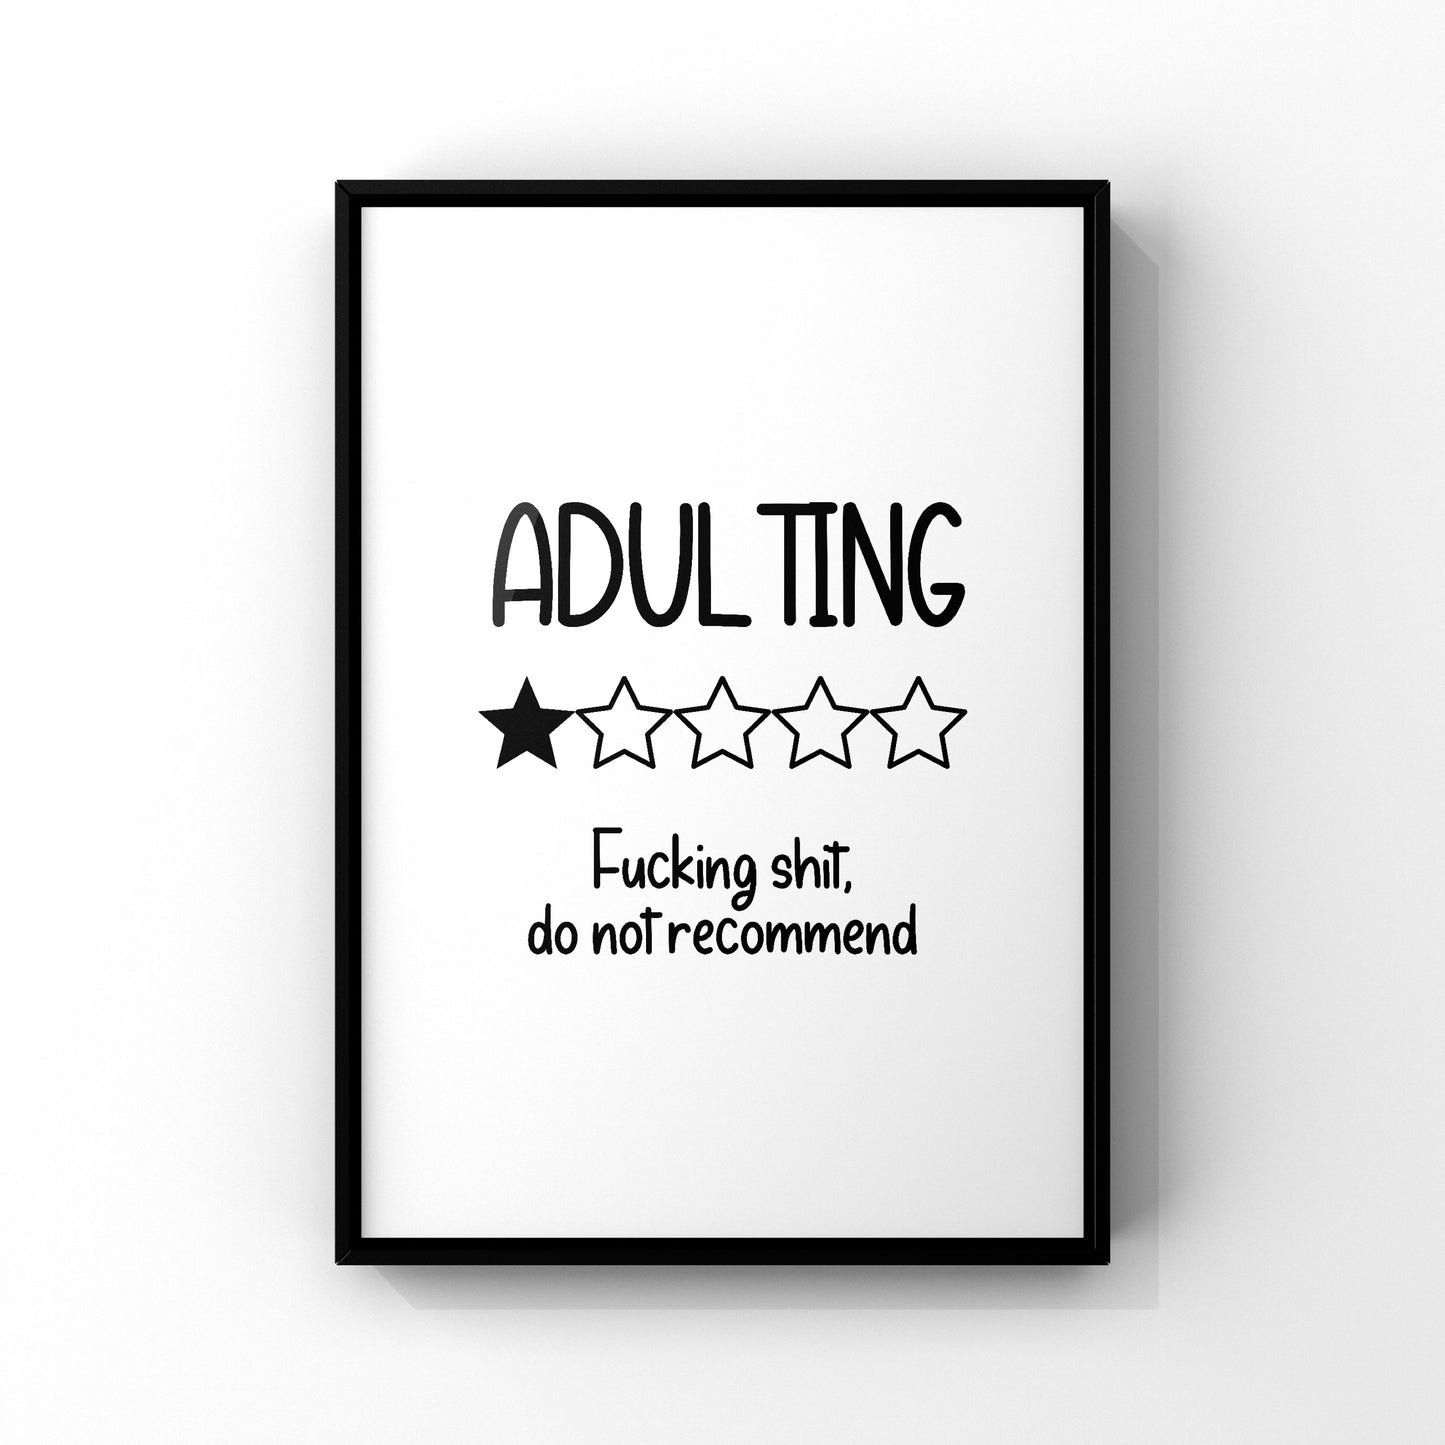 Adulting review